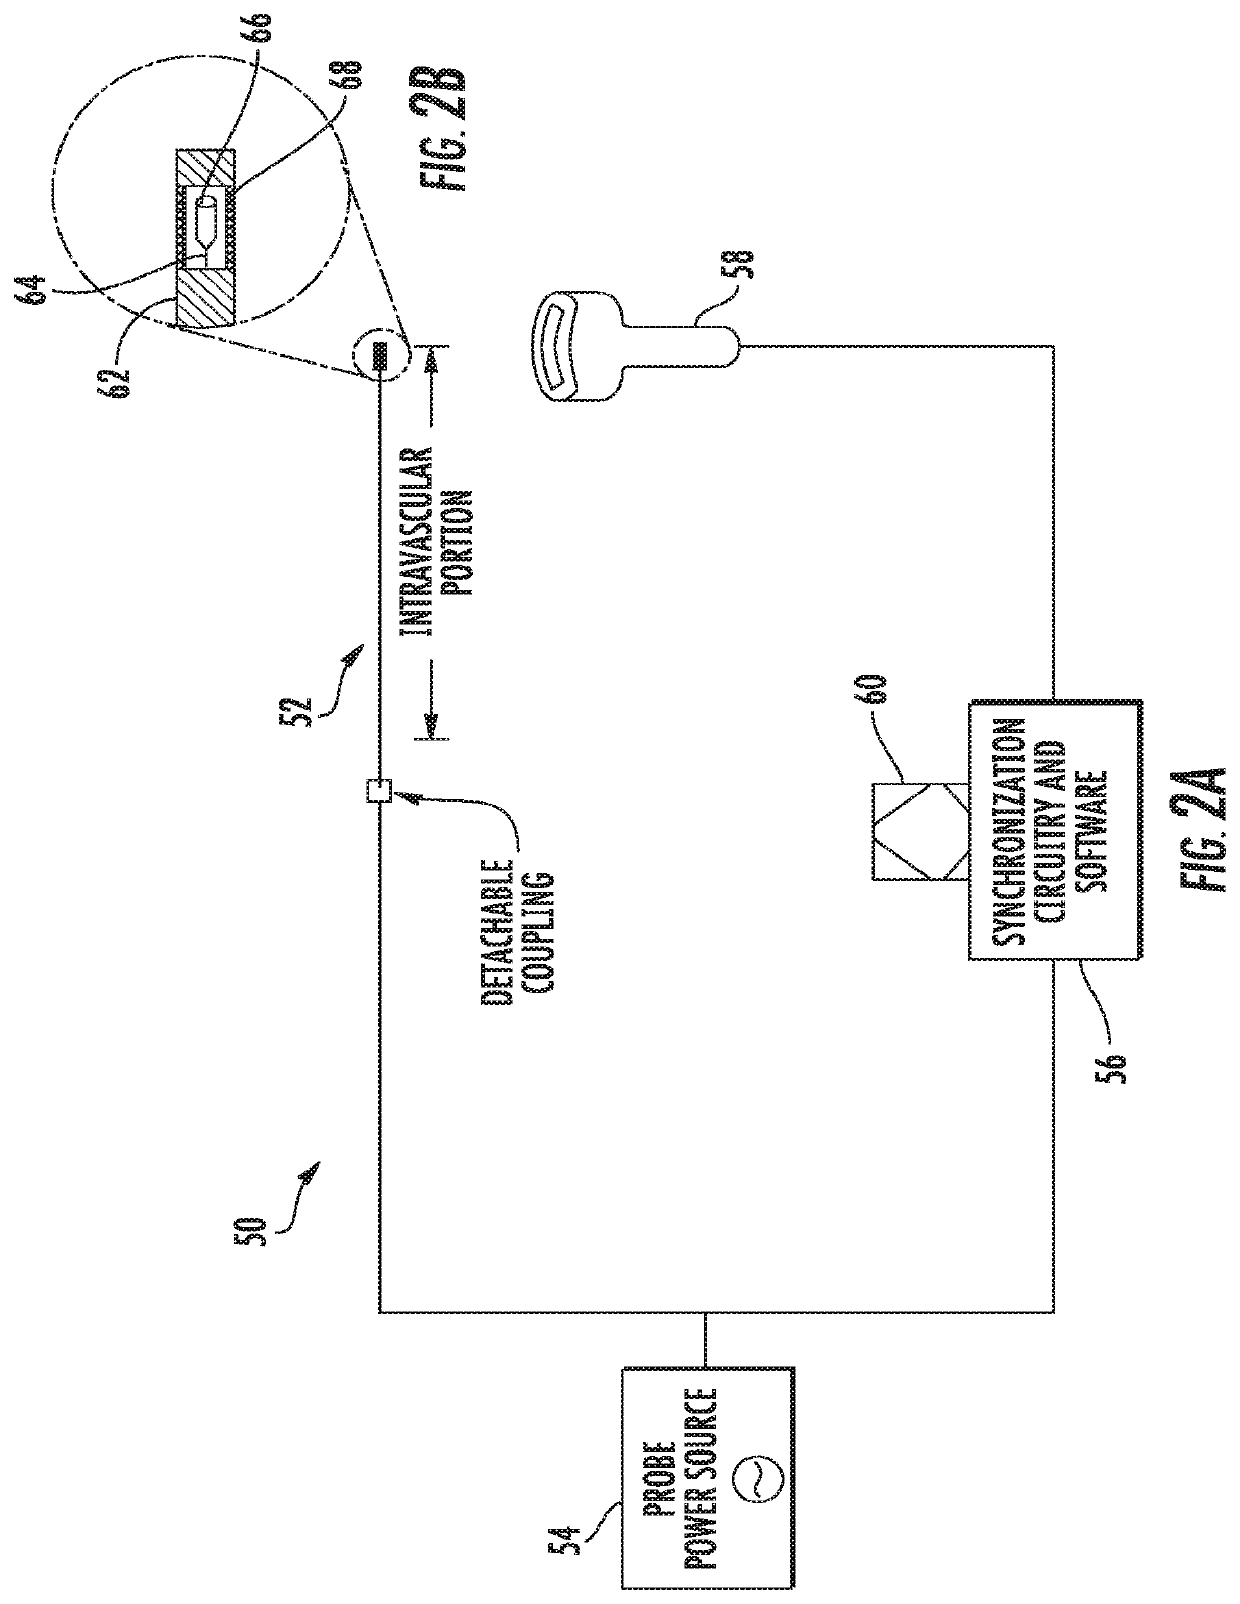 Device for utilizing transmission ultrasonography to enable ultrasound-guided placement of central venous catheters